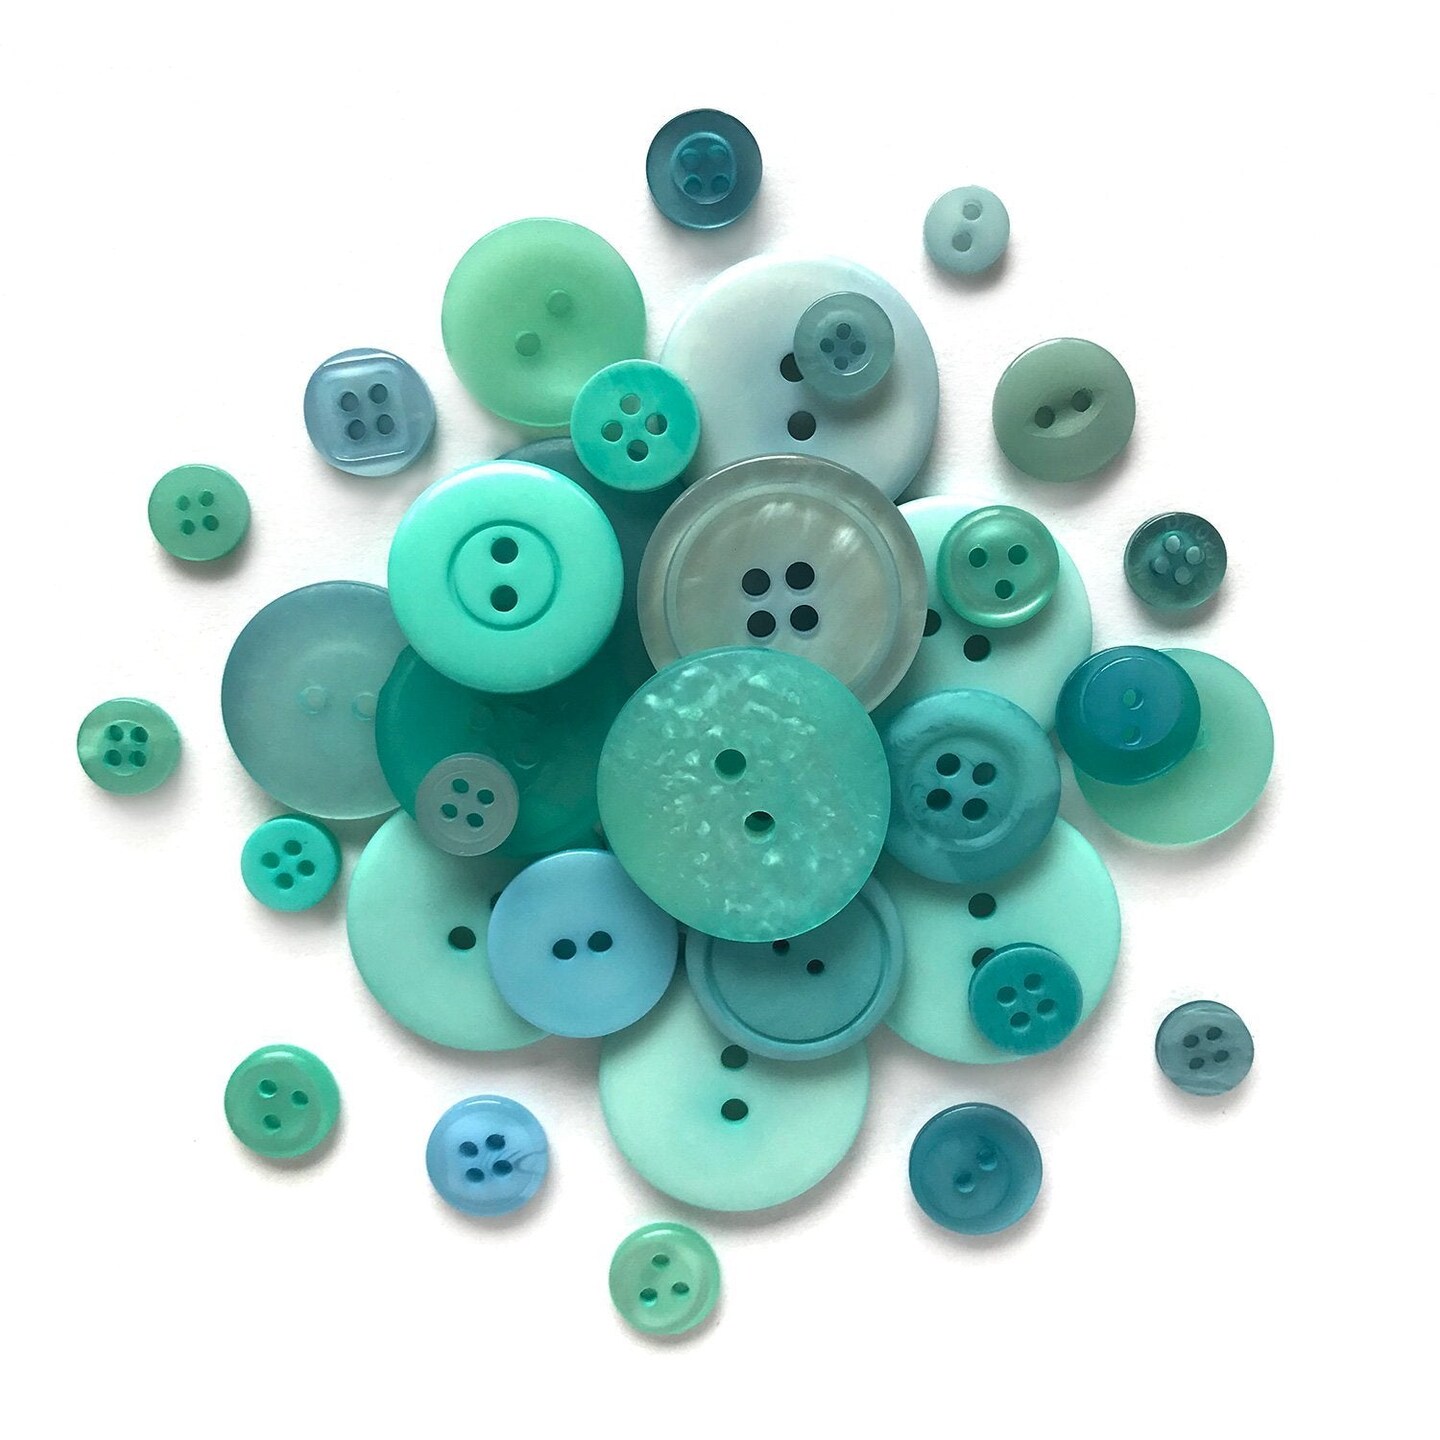 Assorted Buttons in Bulk for Button Crafts